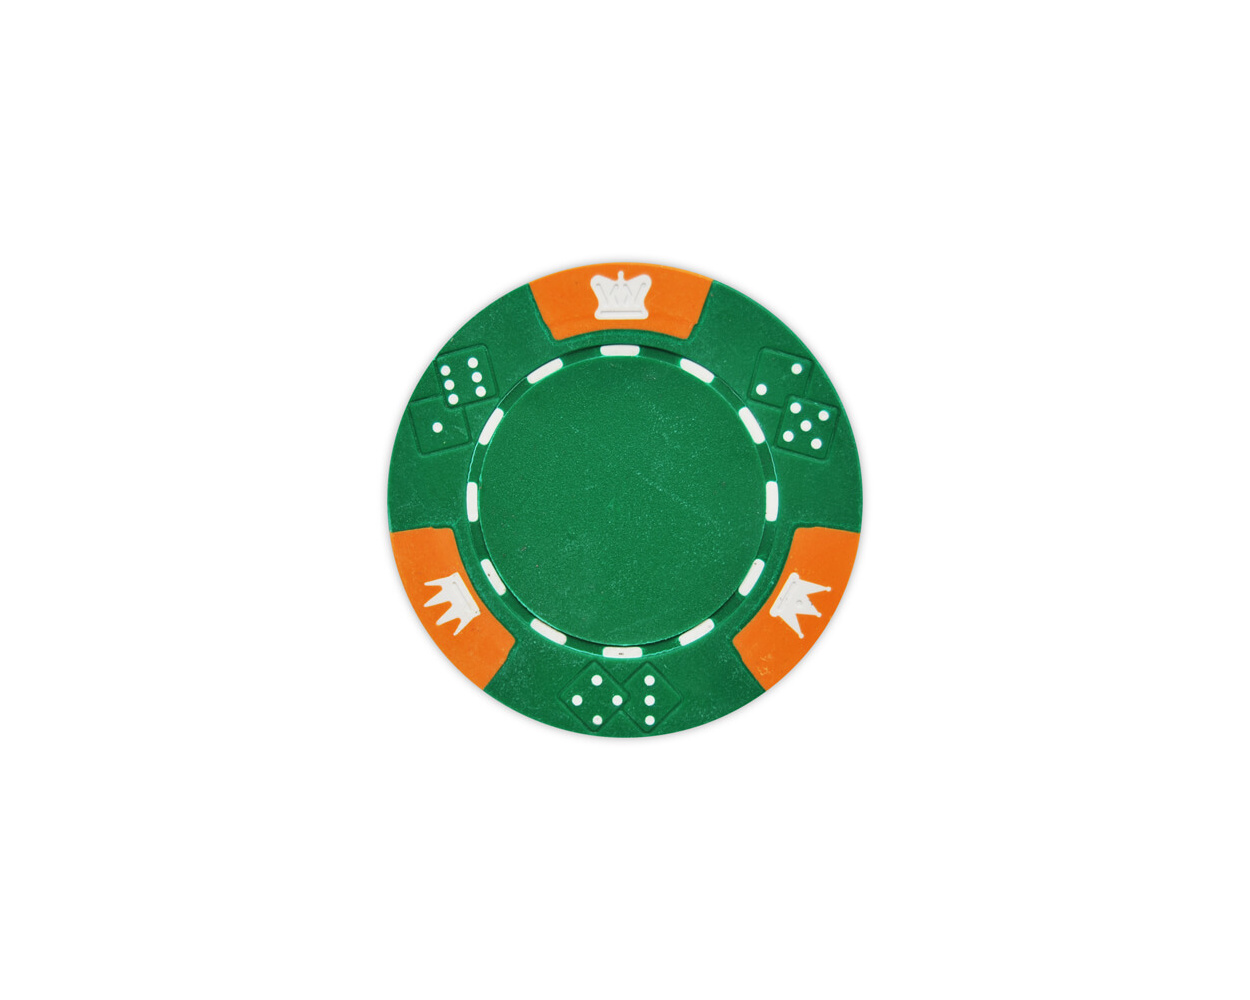 Crown Dice Clay Poker Chips - Green PokerChips.com